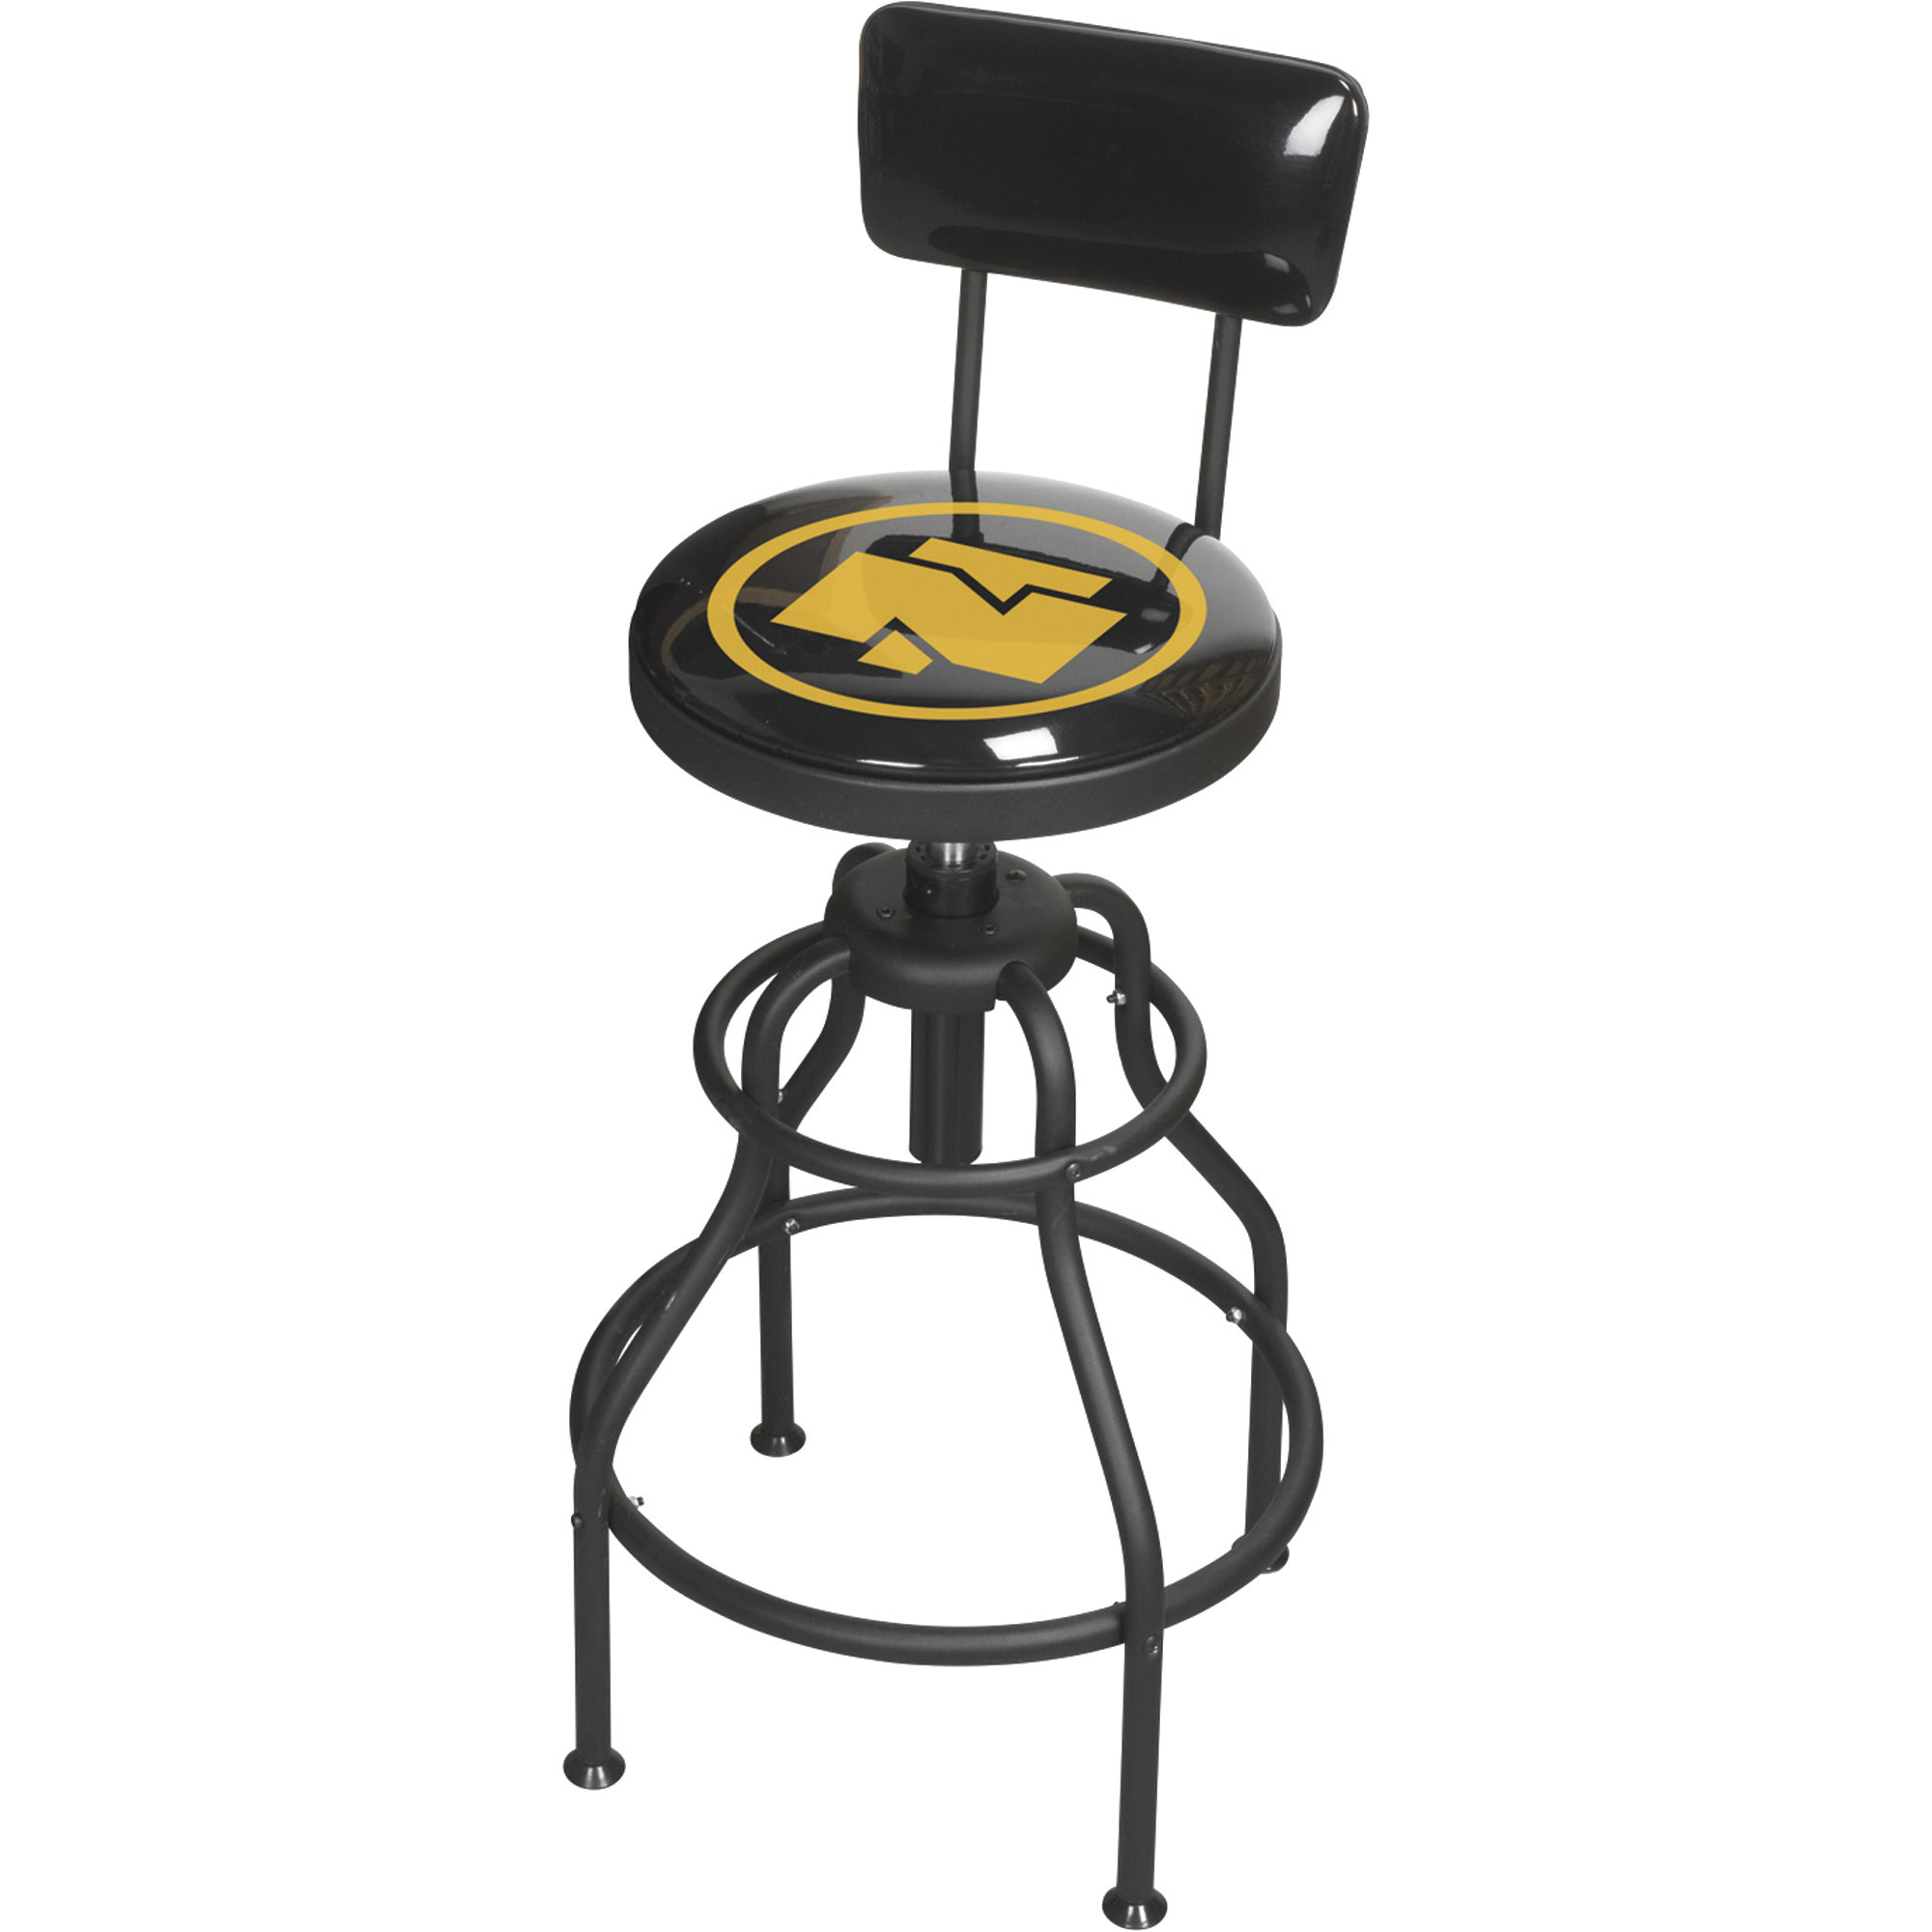 Northern Tool Adjustable Swivel Shop Stool with Backrest, Steel, 275-Lb. Capacity, 29 to 33Inch Seat Height